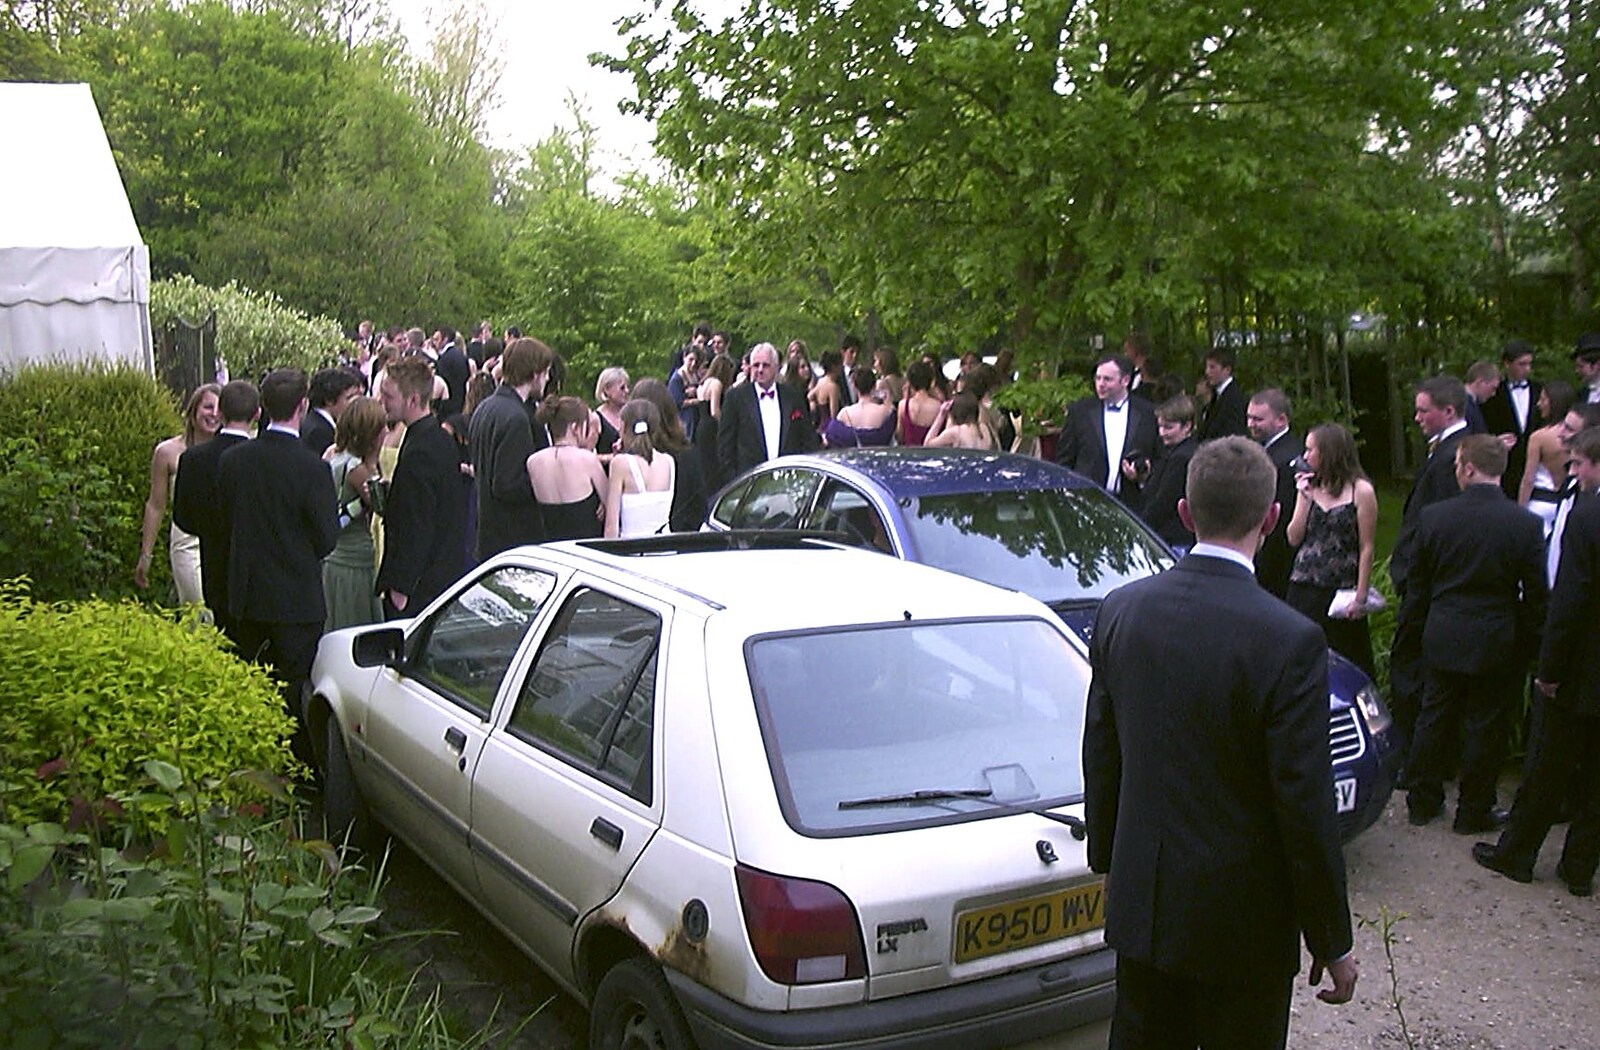 The High-schoolers arrive for their prom from The BBs do Gissing Hall, and a Night in the Garden, Brome, Suffolk - 14th May 2004